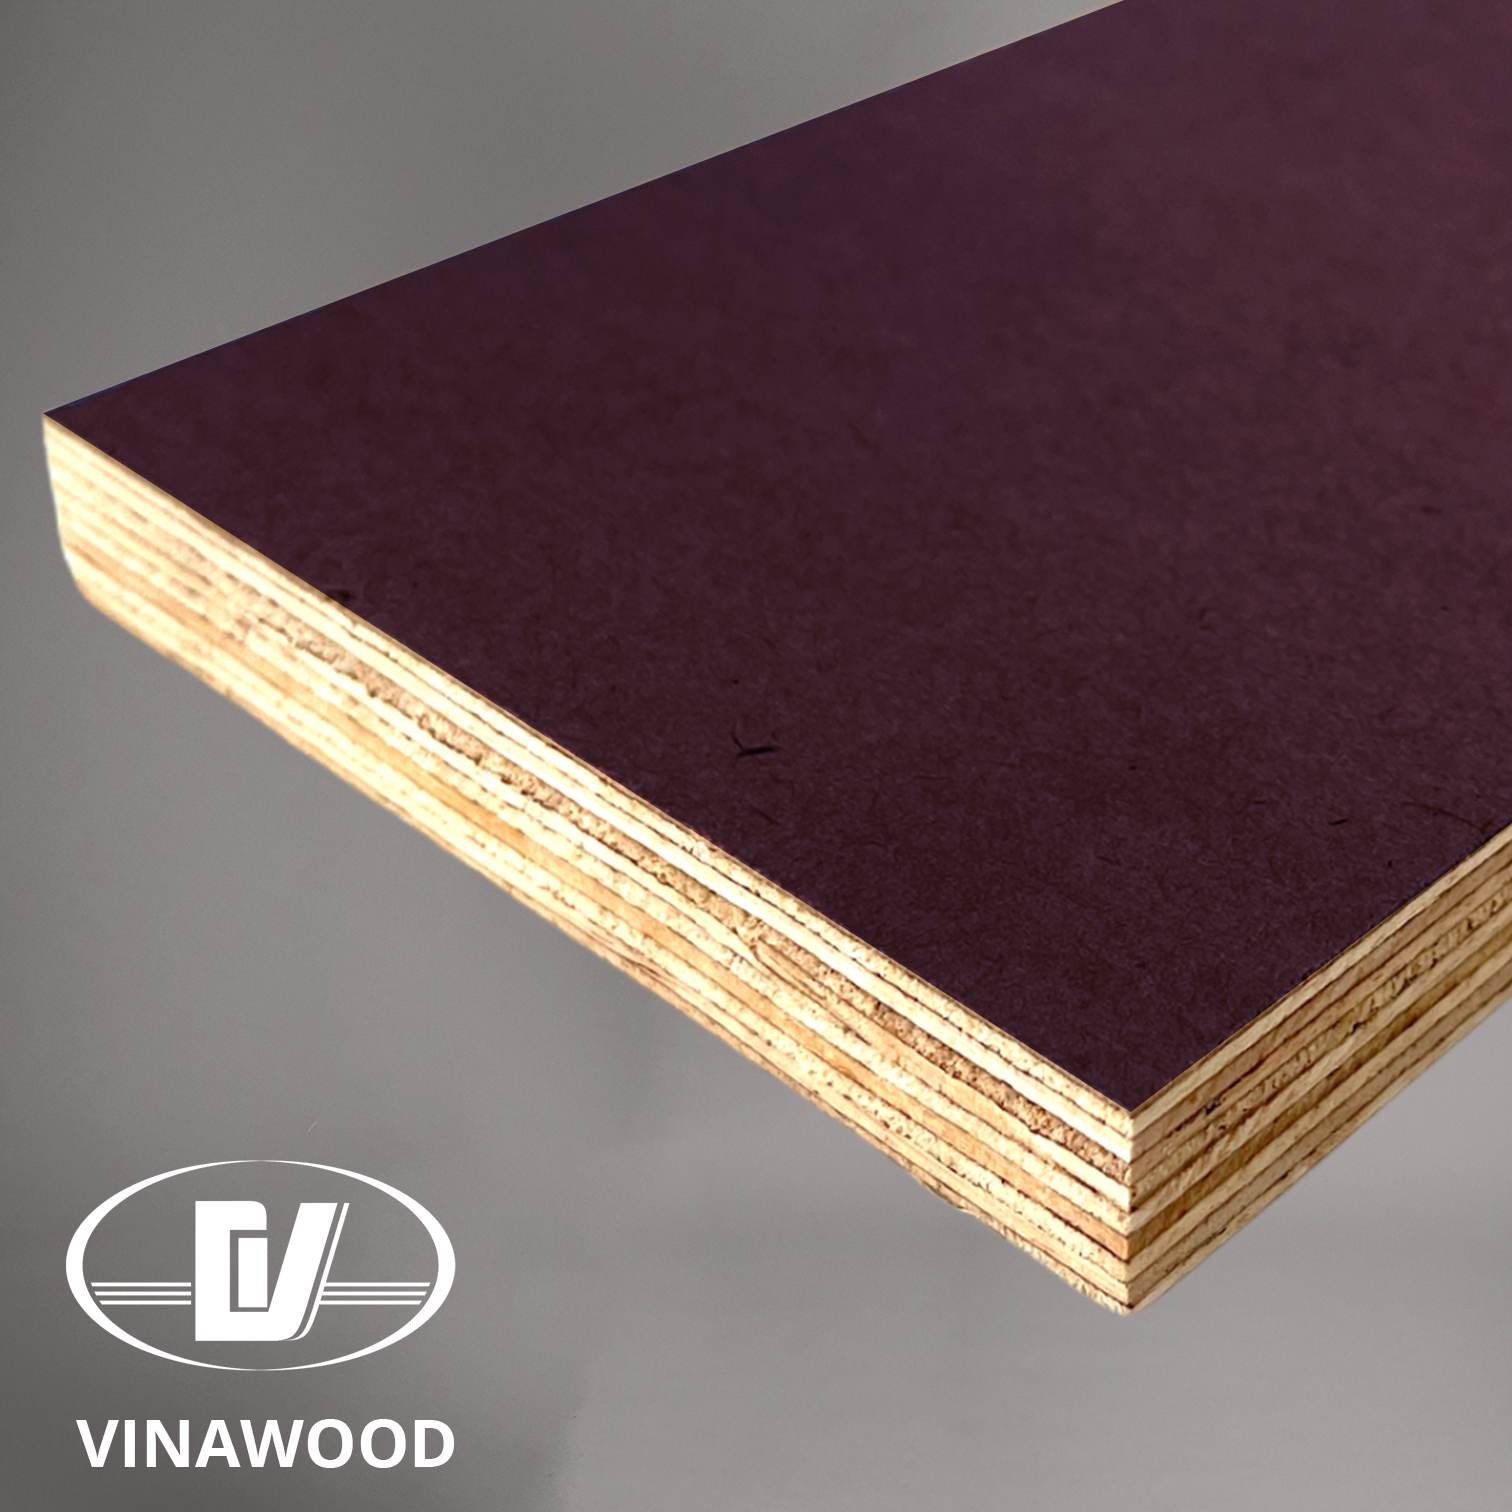 MDO 1S Panel with Film backer - High Density - Purple color - MDO Plywood